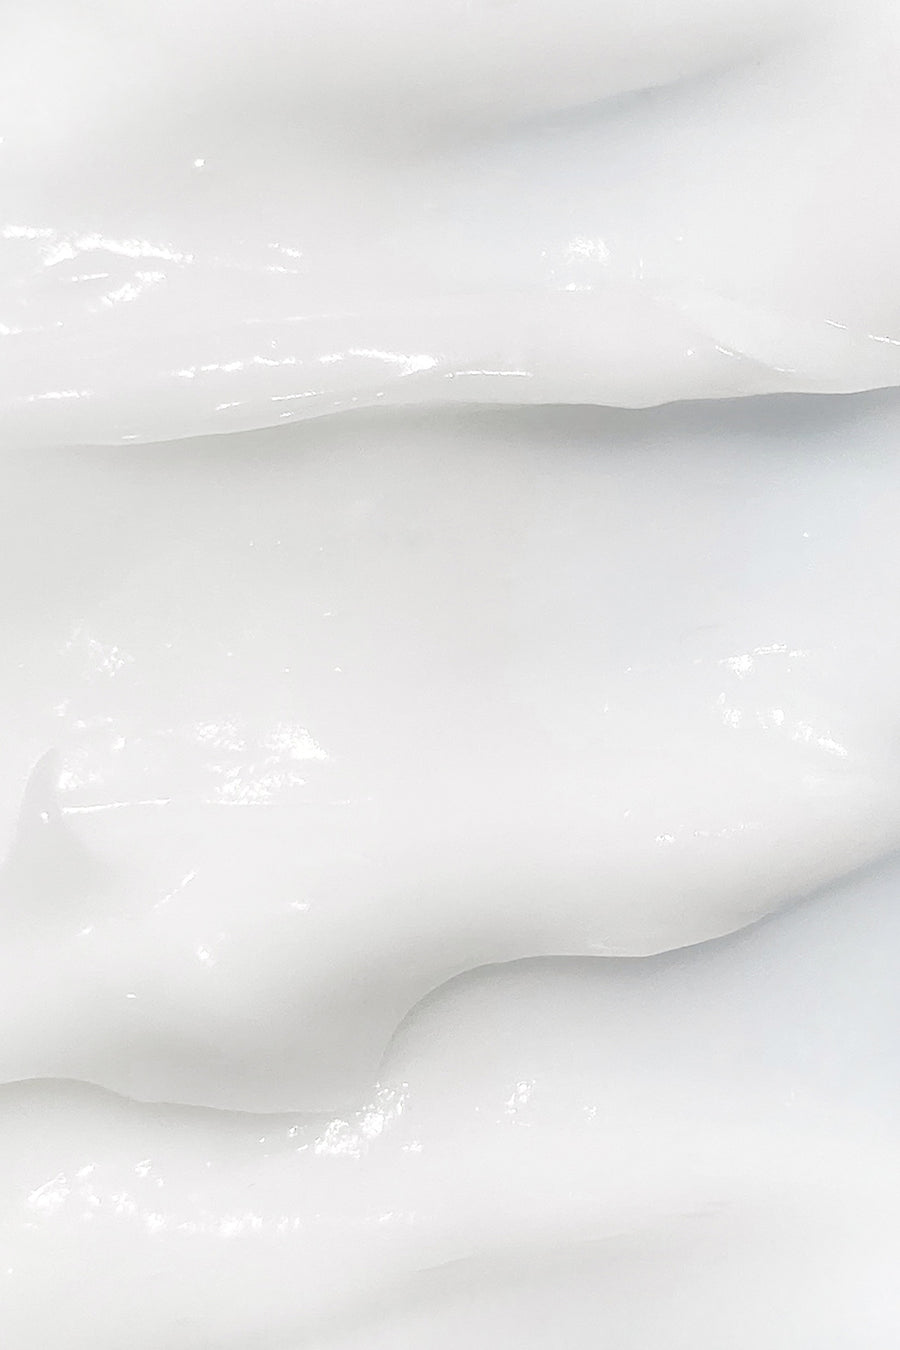 white goop image, layers of conditioner